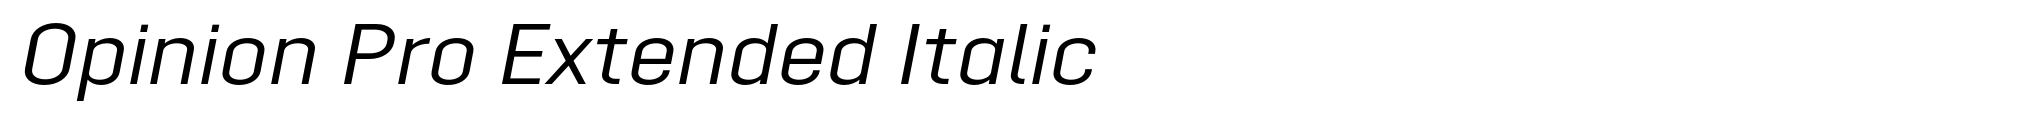 Opinion Pro Extended Italic image